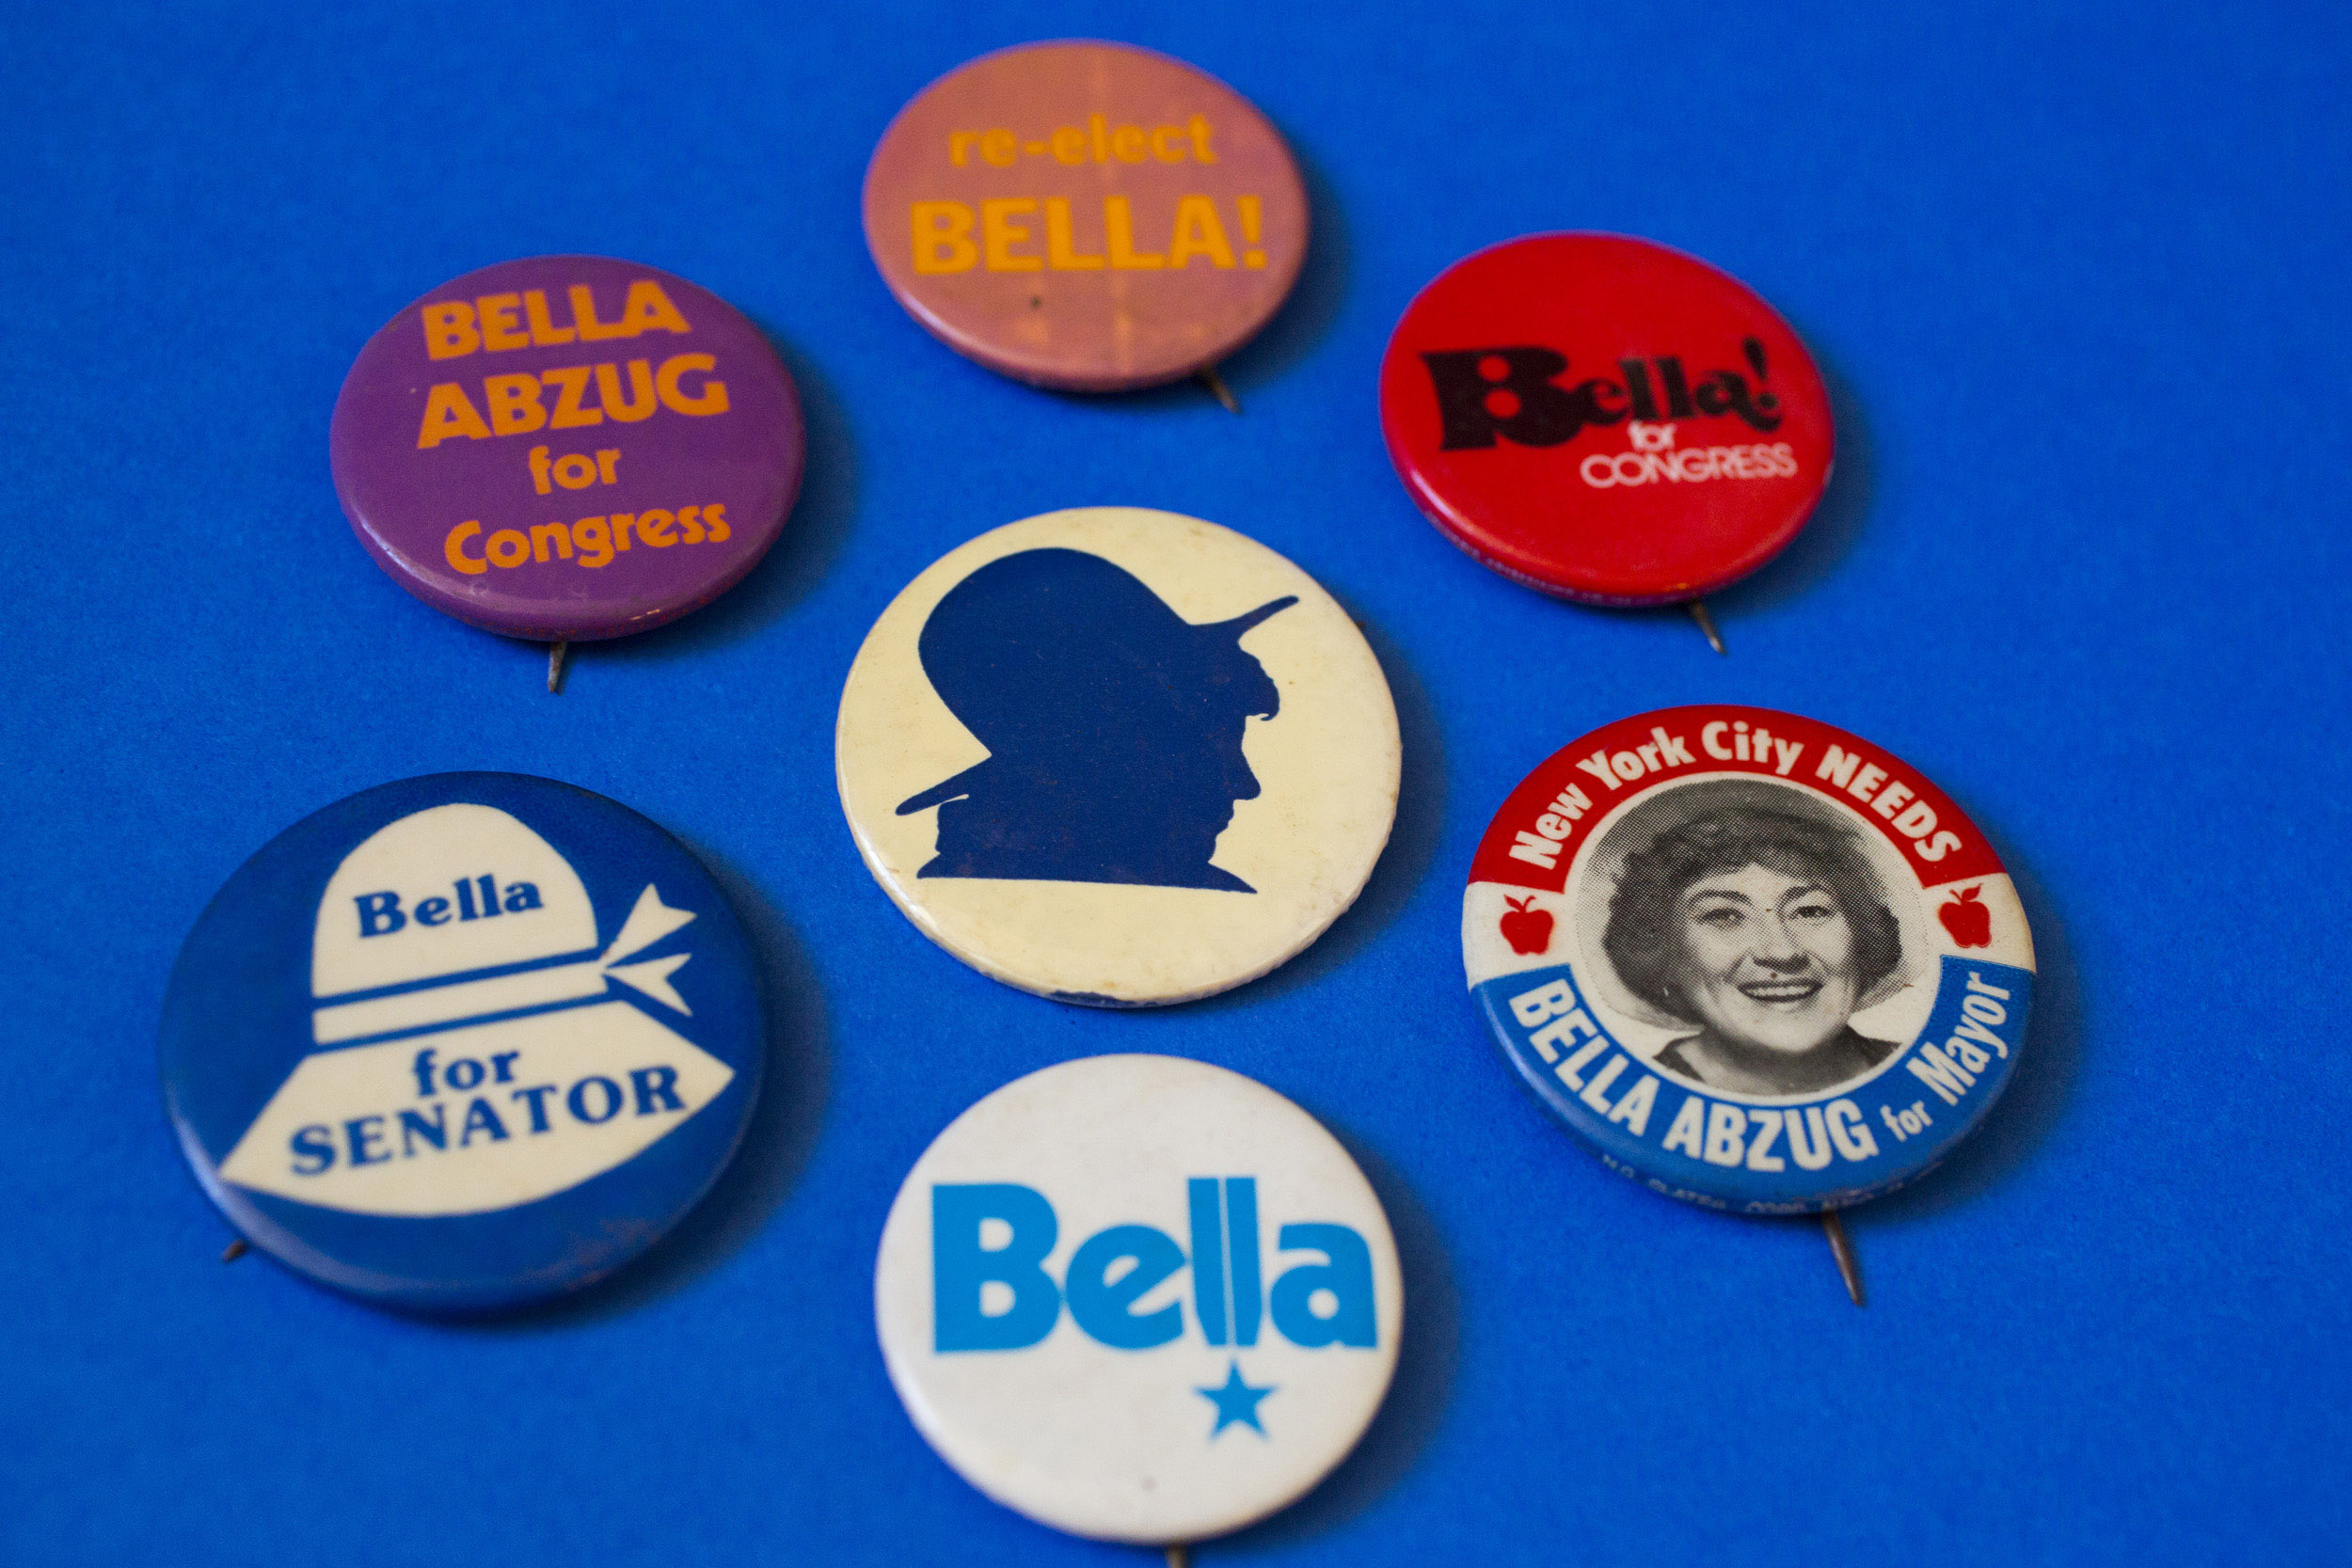 U.S. Rep. and social activist Bella Abzug, noted for her signature hats.